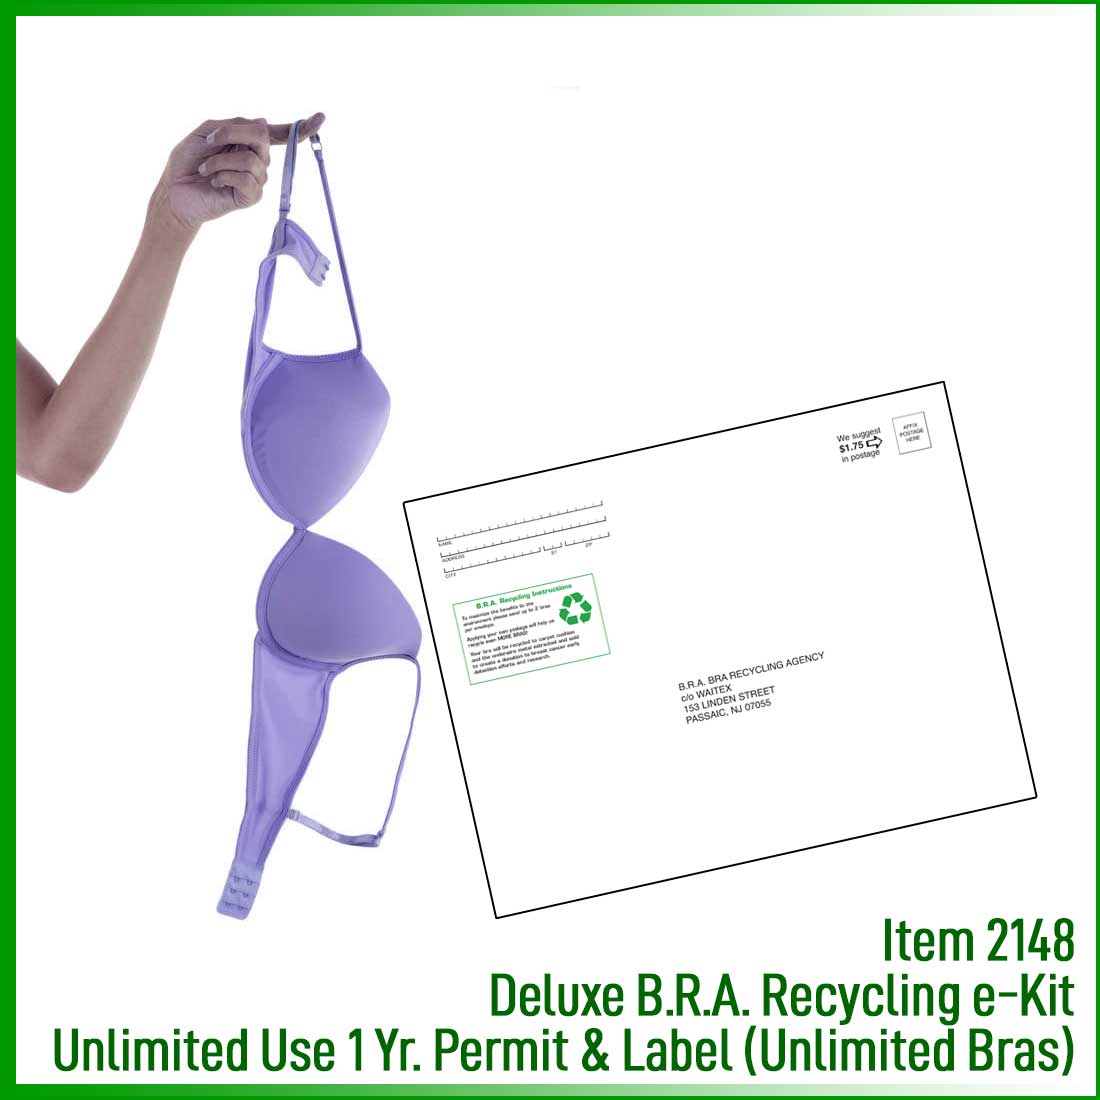 Deluxe B.R.A. Recycling e-Kit, Unlimited Use 1 Year Label (Unlimited Bras)